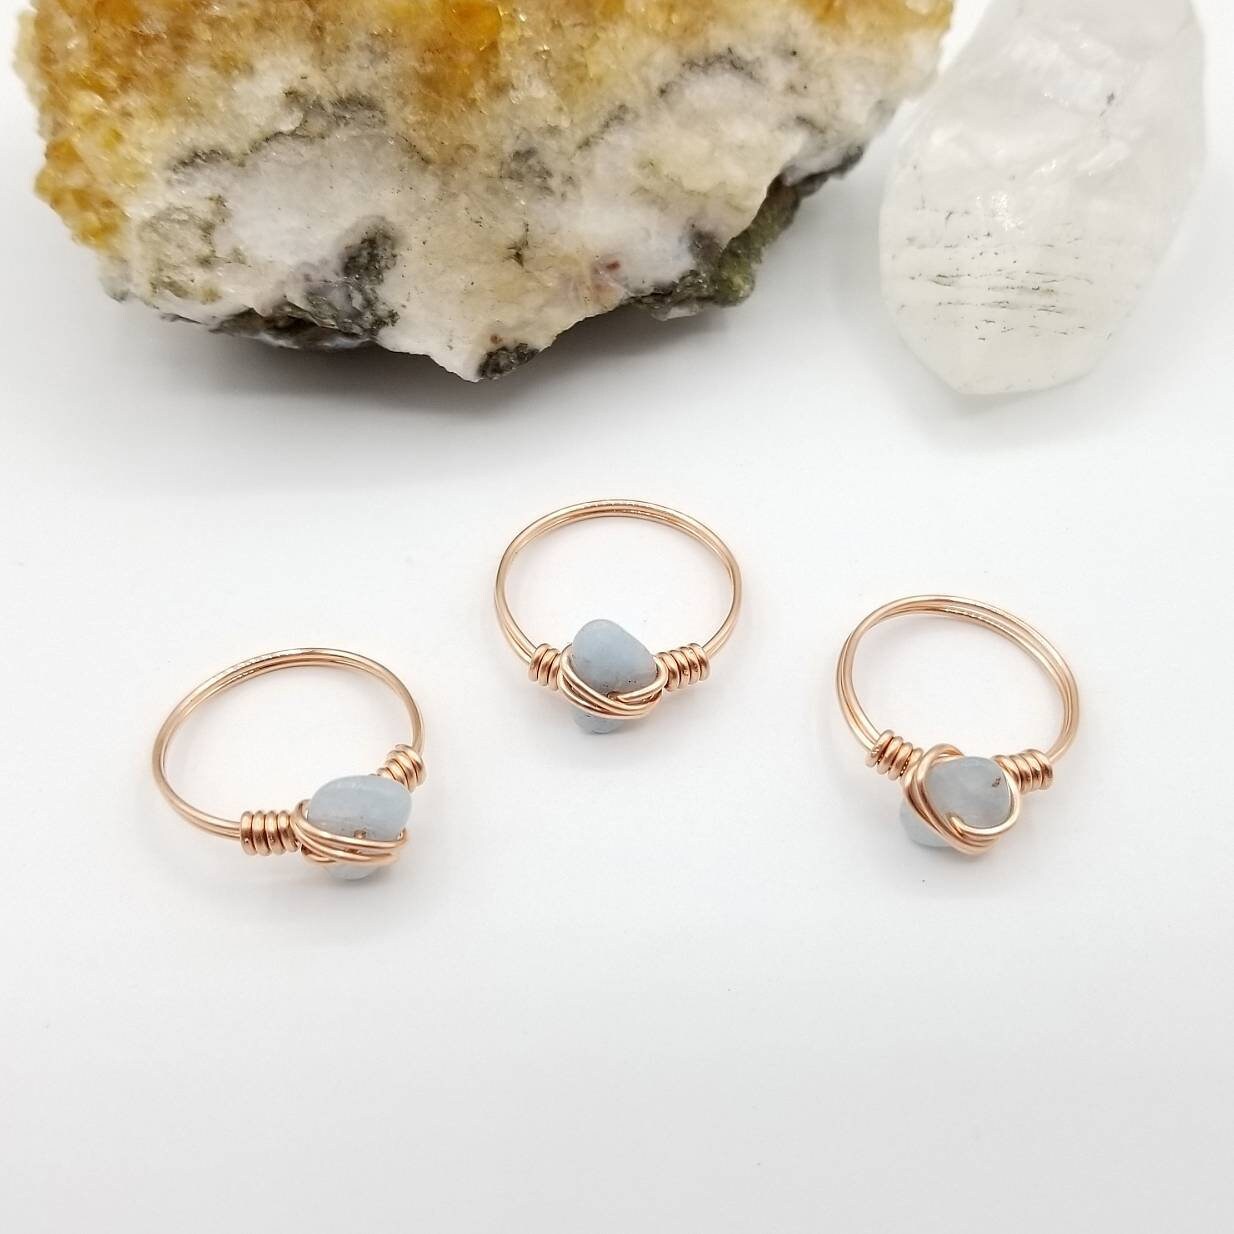 Aquamarine Ring, Copper Wire Wrapped Ring